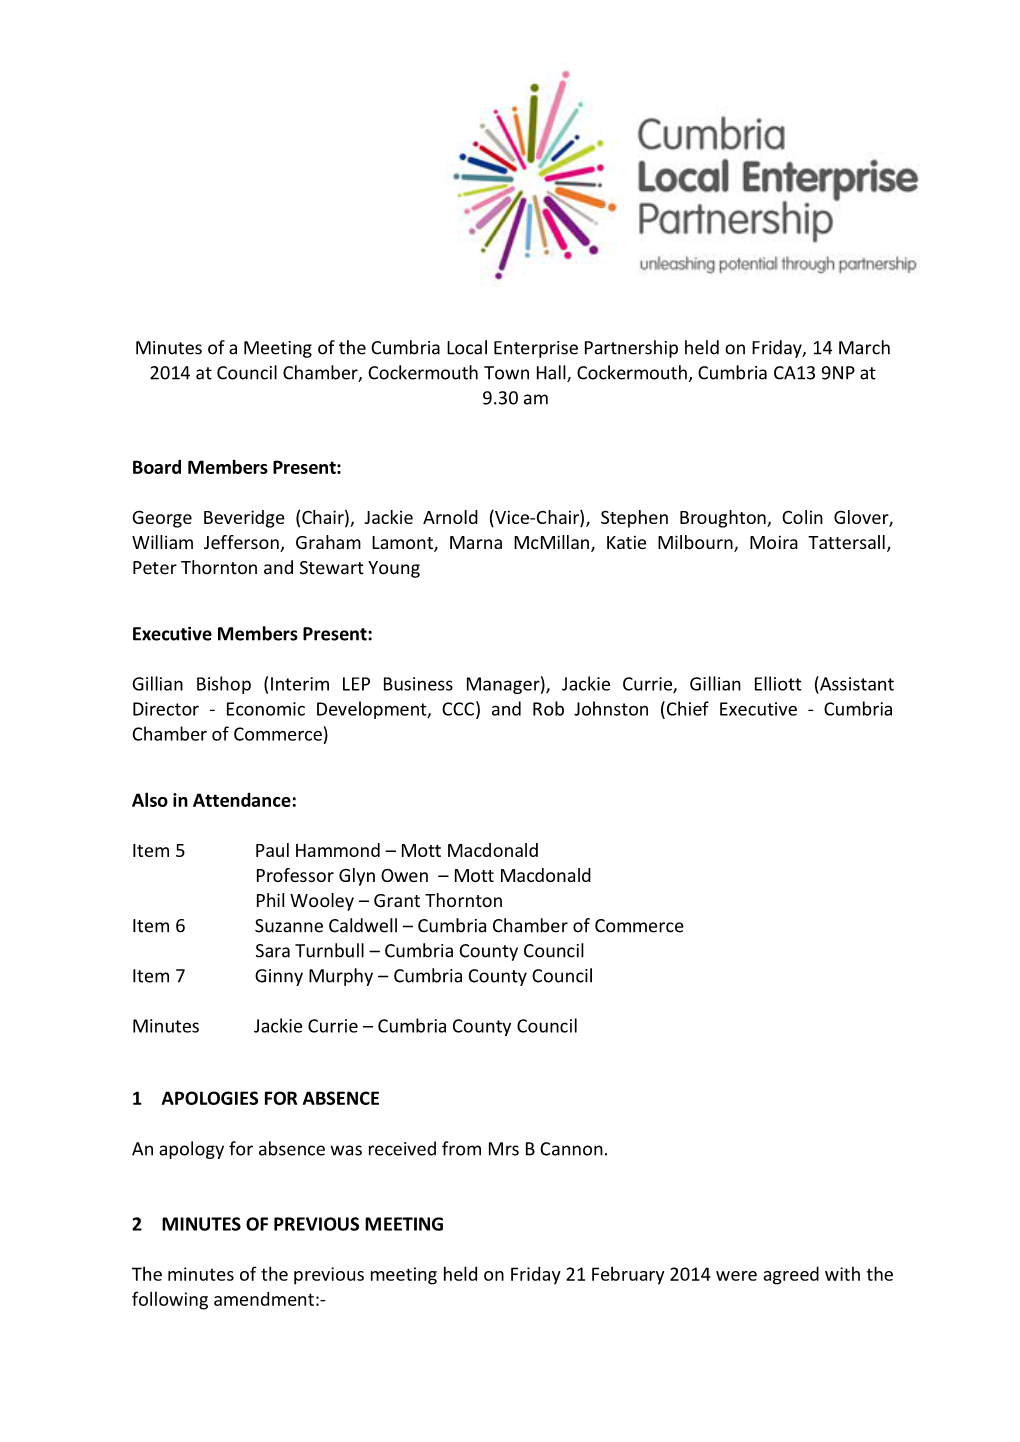 Minutes of a Meeting of the Cumbria Local Enterprise Partnership